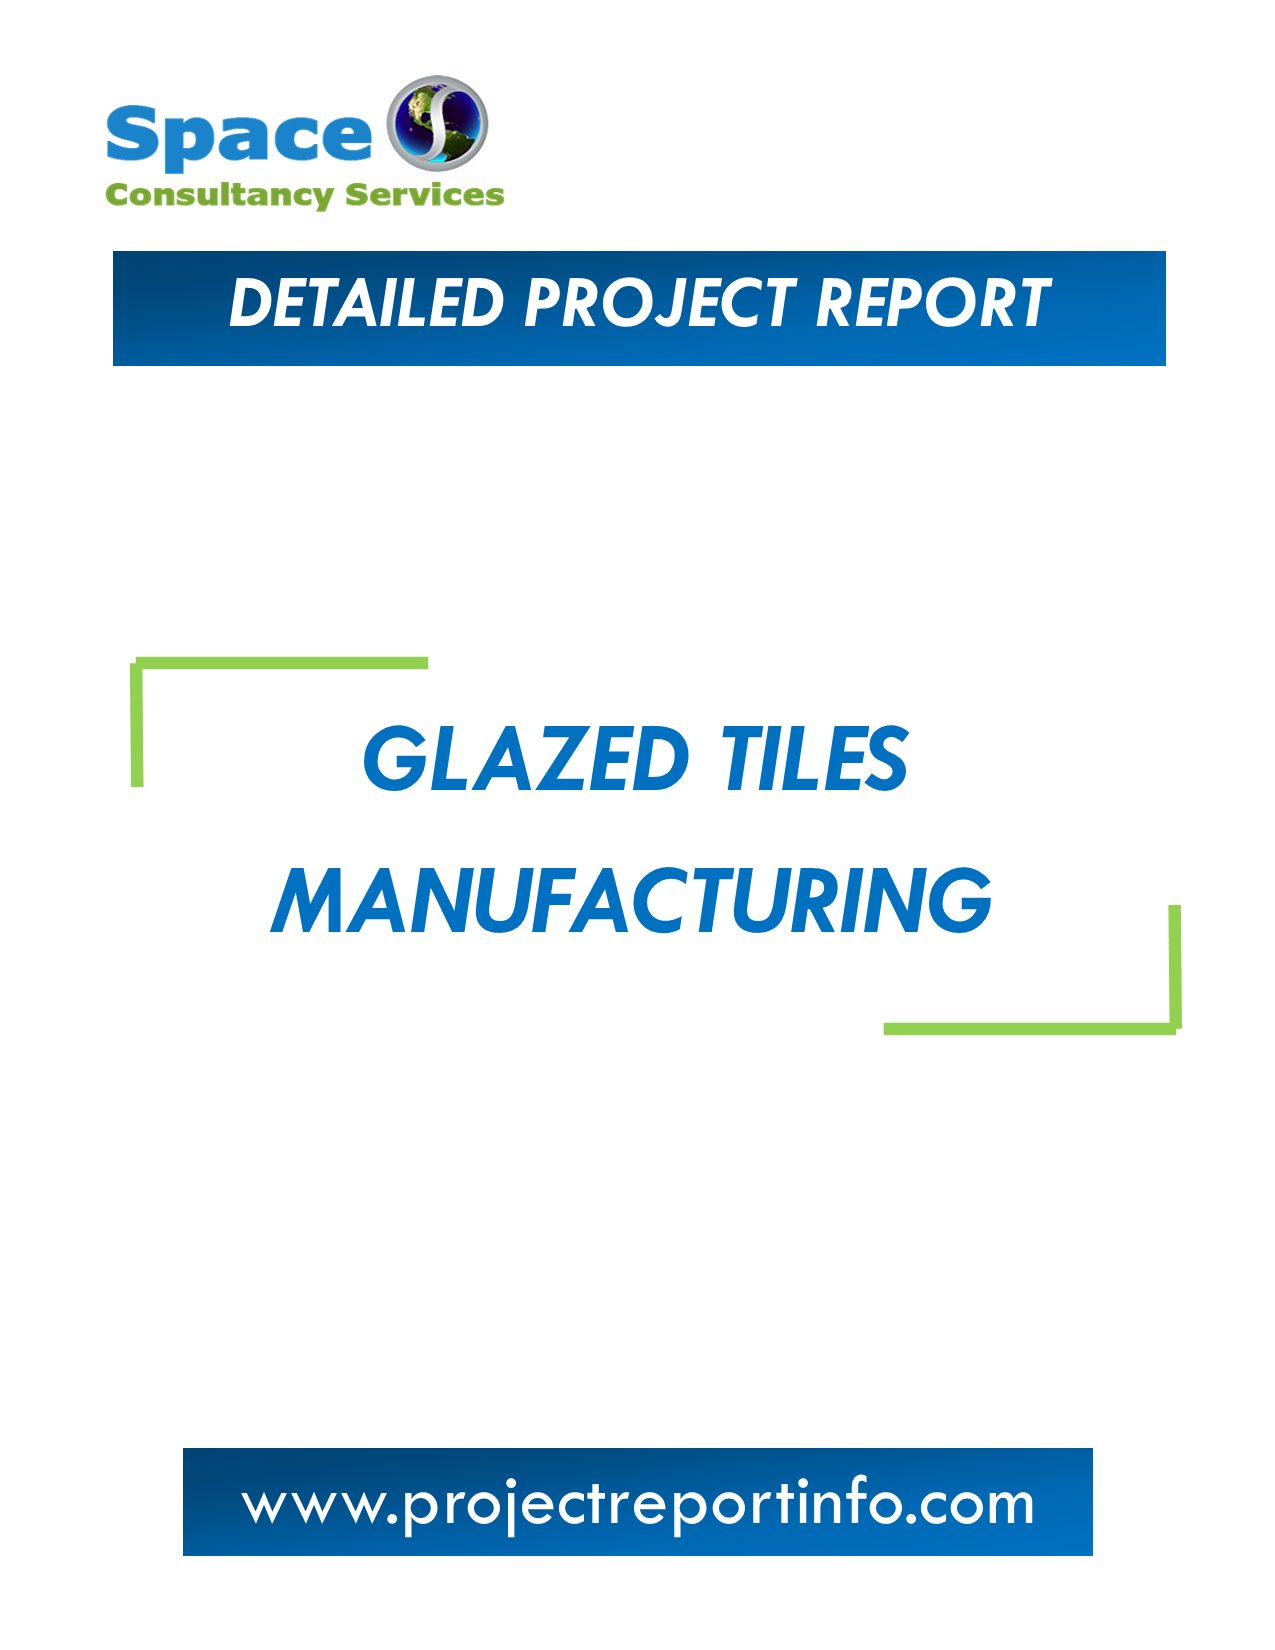 Project Report on Glazed Tiles Manufacturing